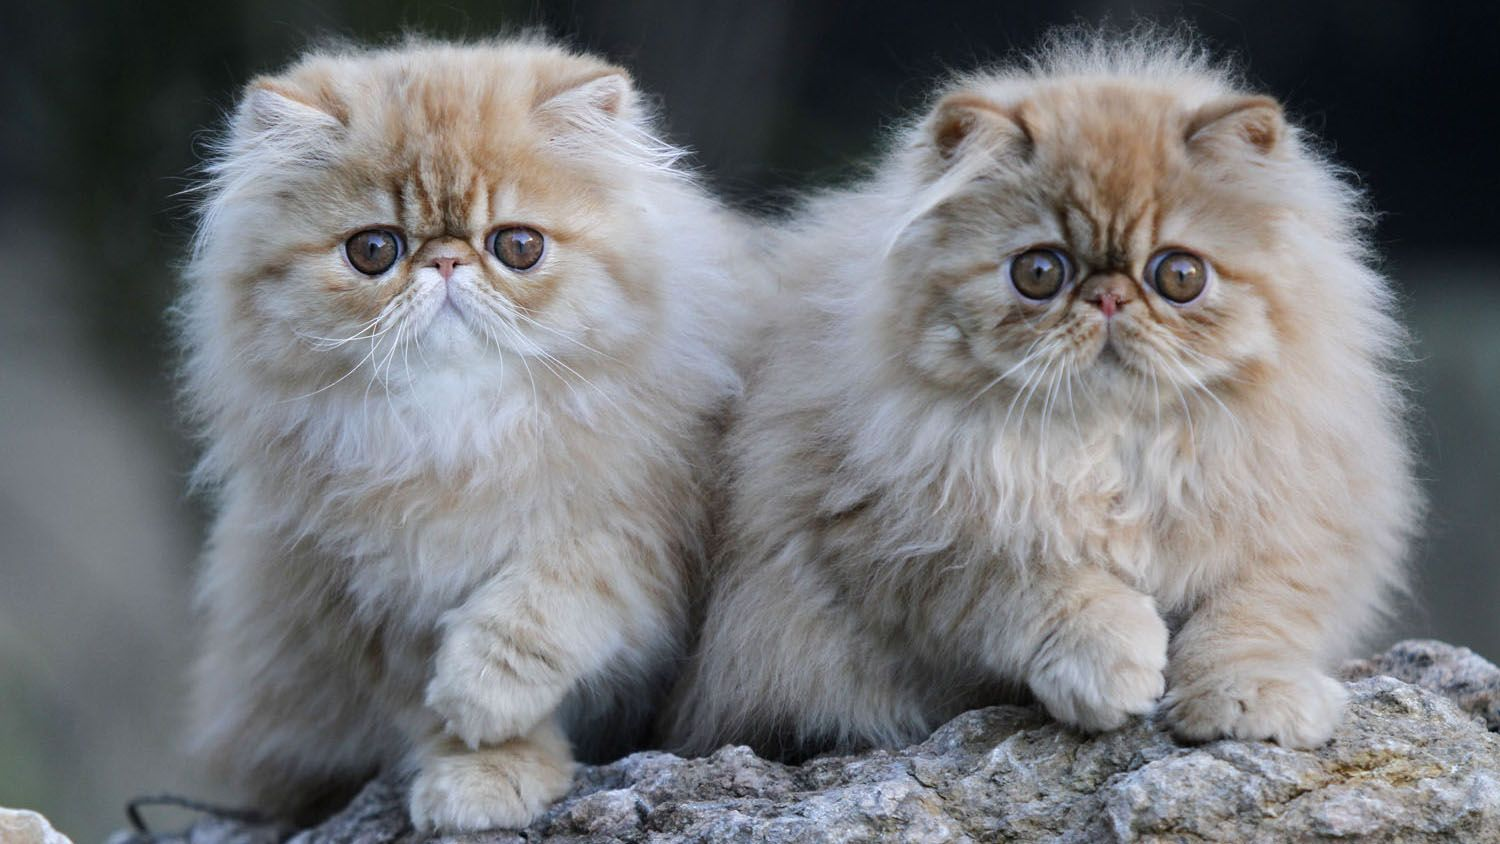 Two ginger Persian kittens sat next to each other on a rock